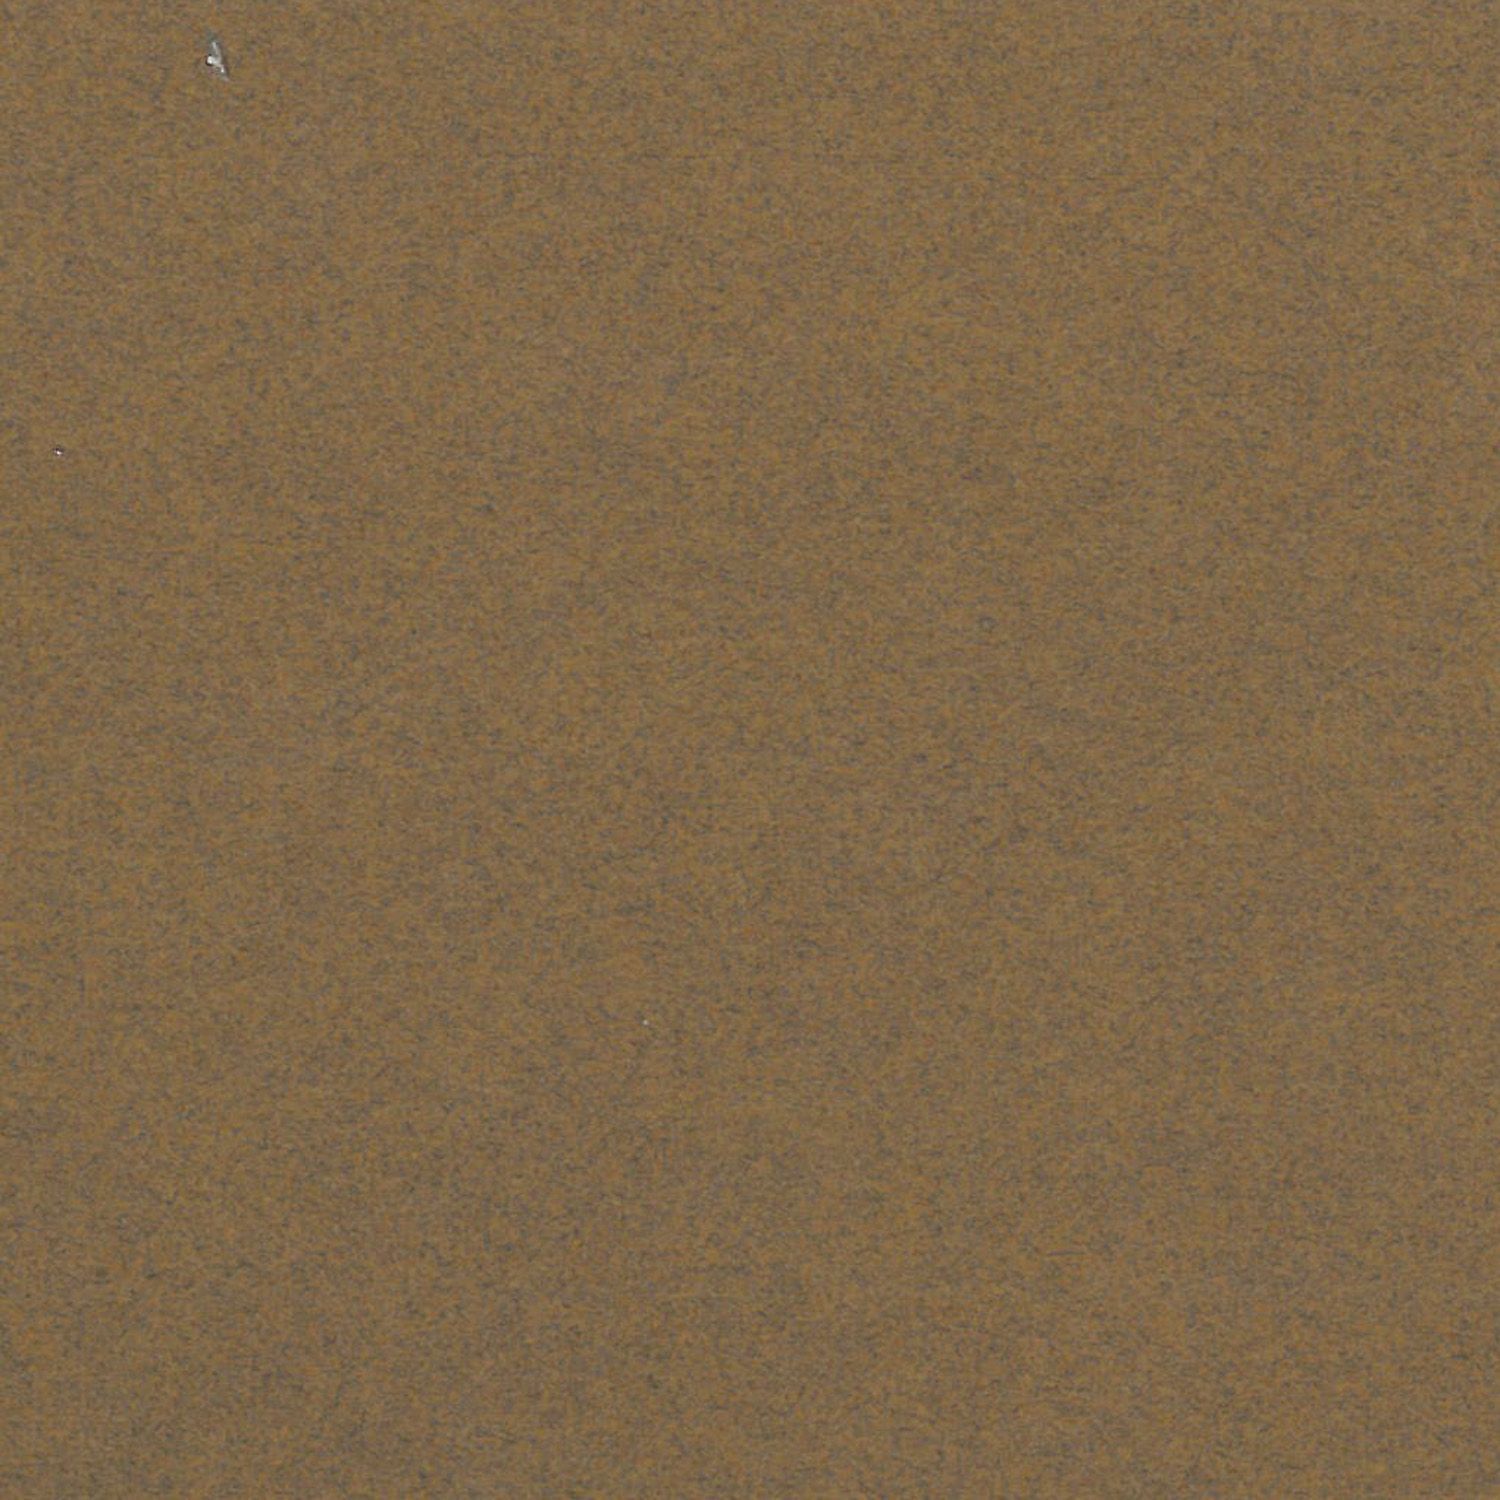 Feuille Ingres  Clairefontaine  50x65 Marron